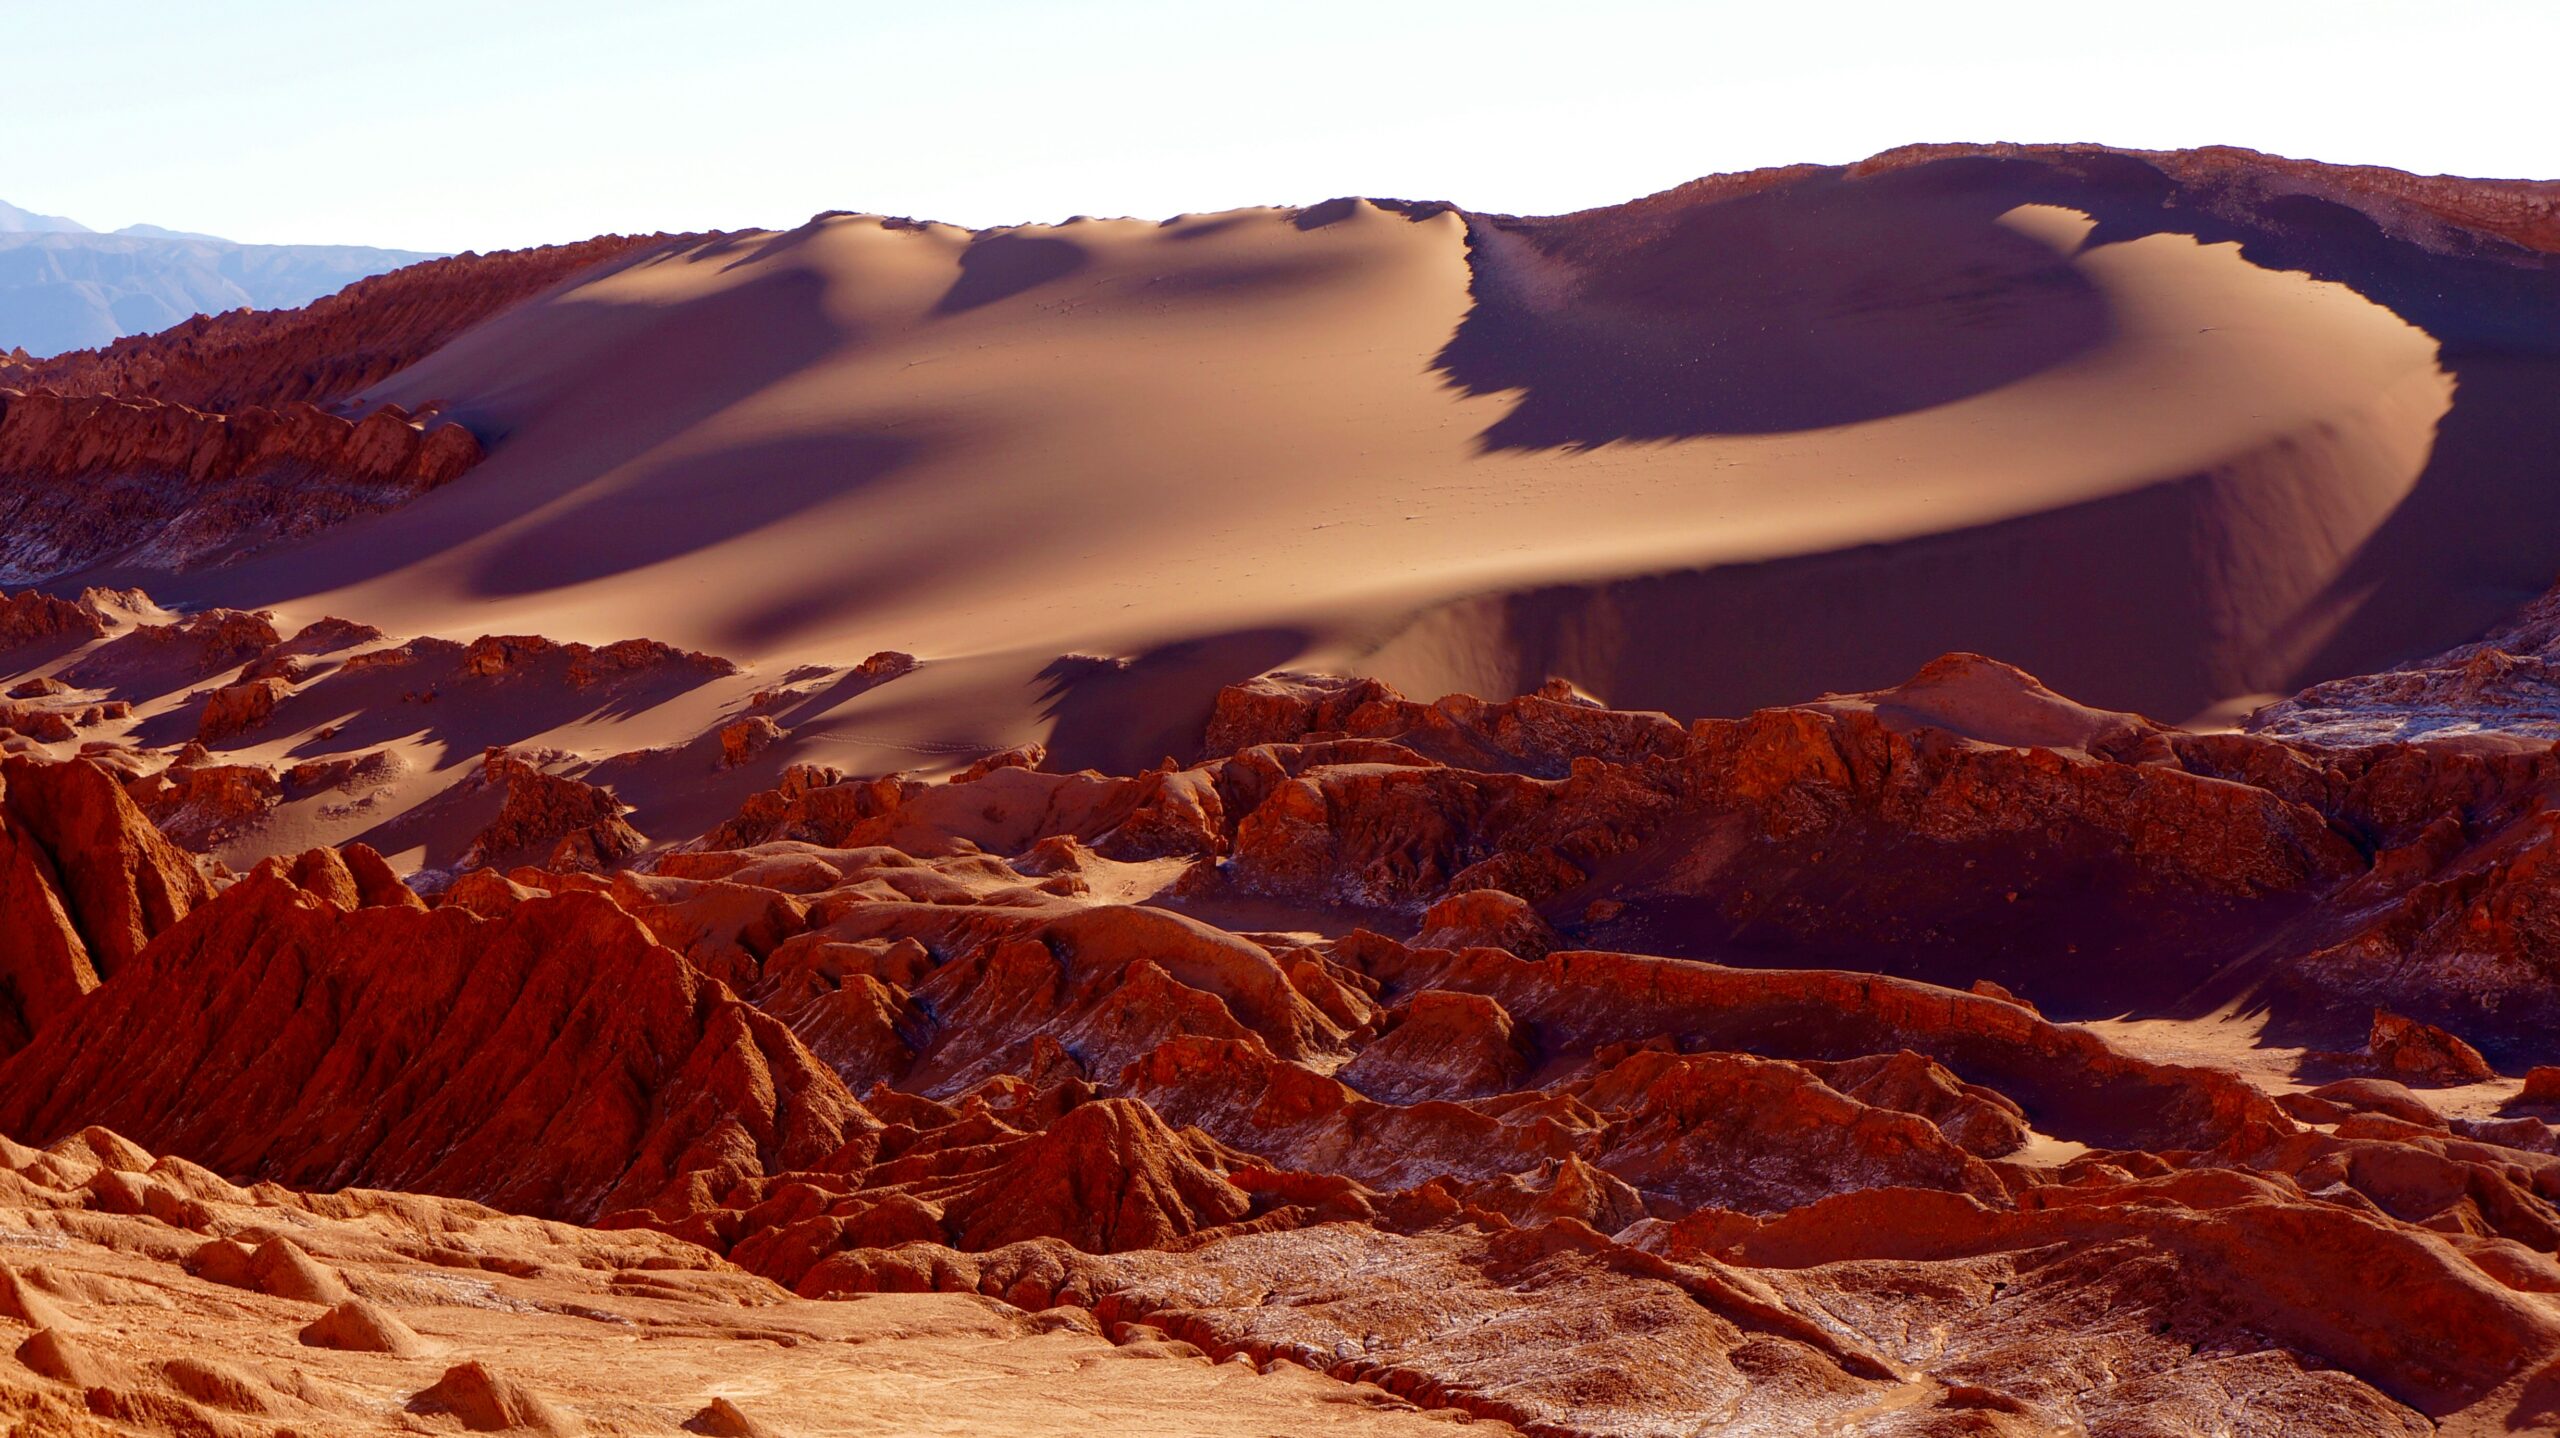 The Hidden World: Life and Adaptations in Earth's Driest Desert